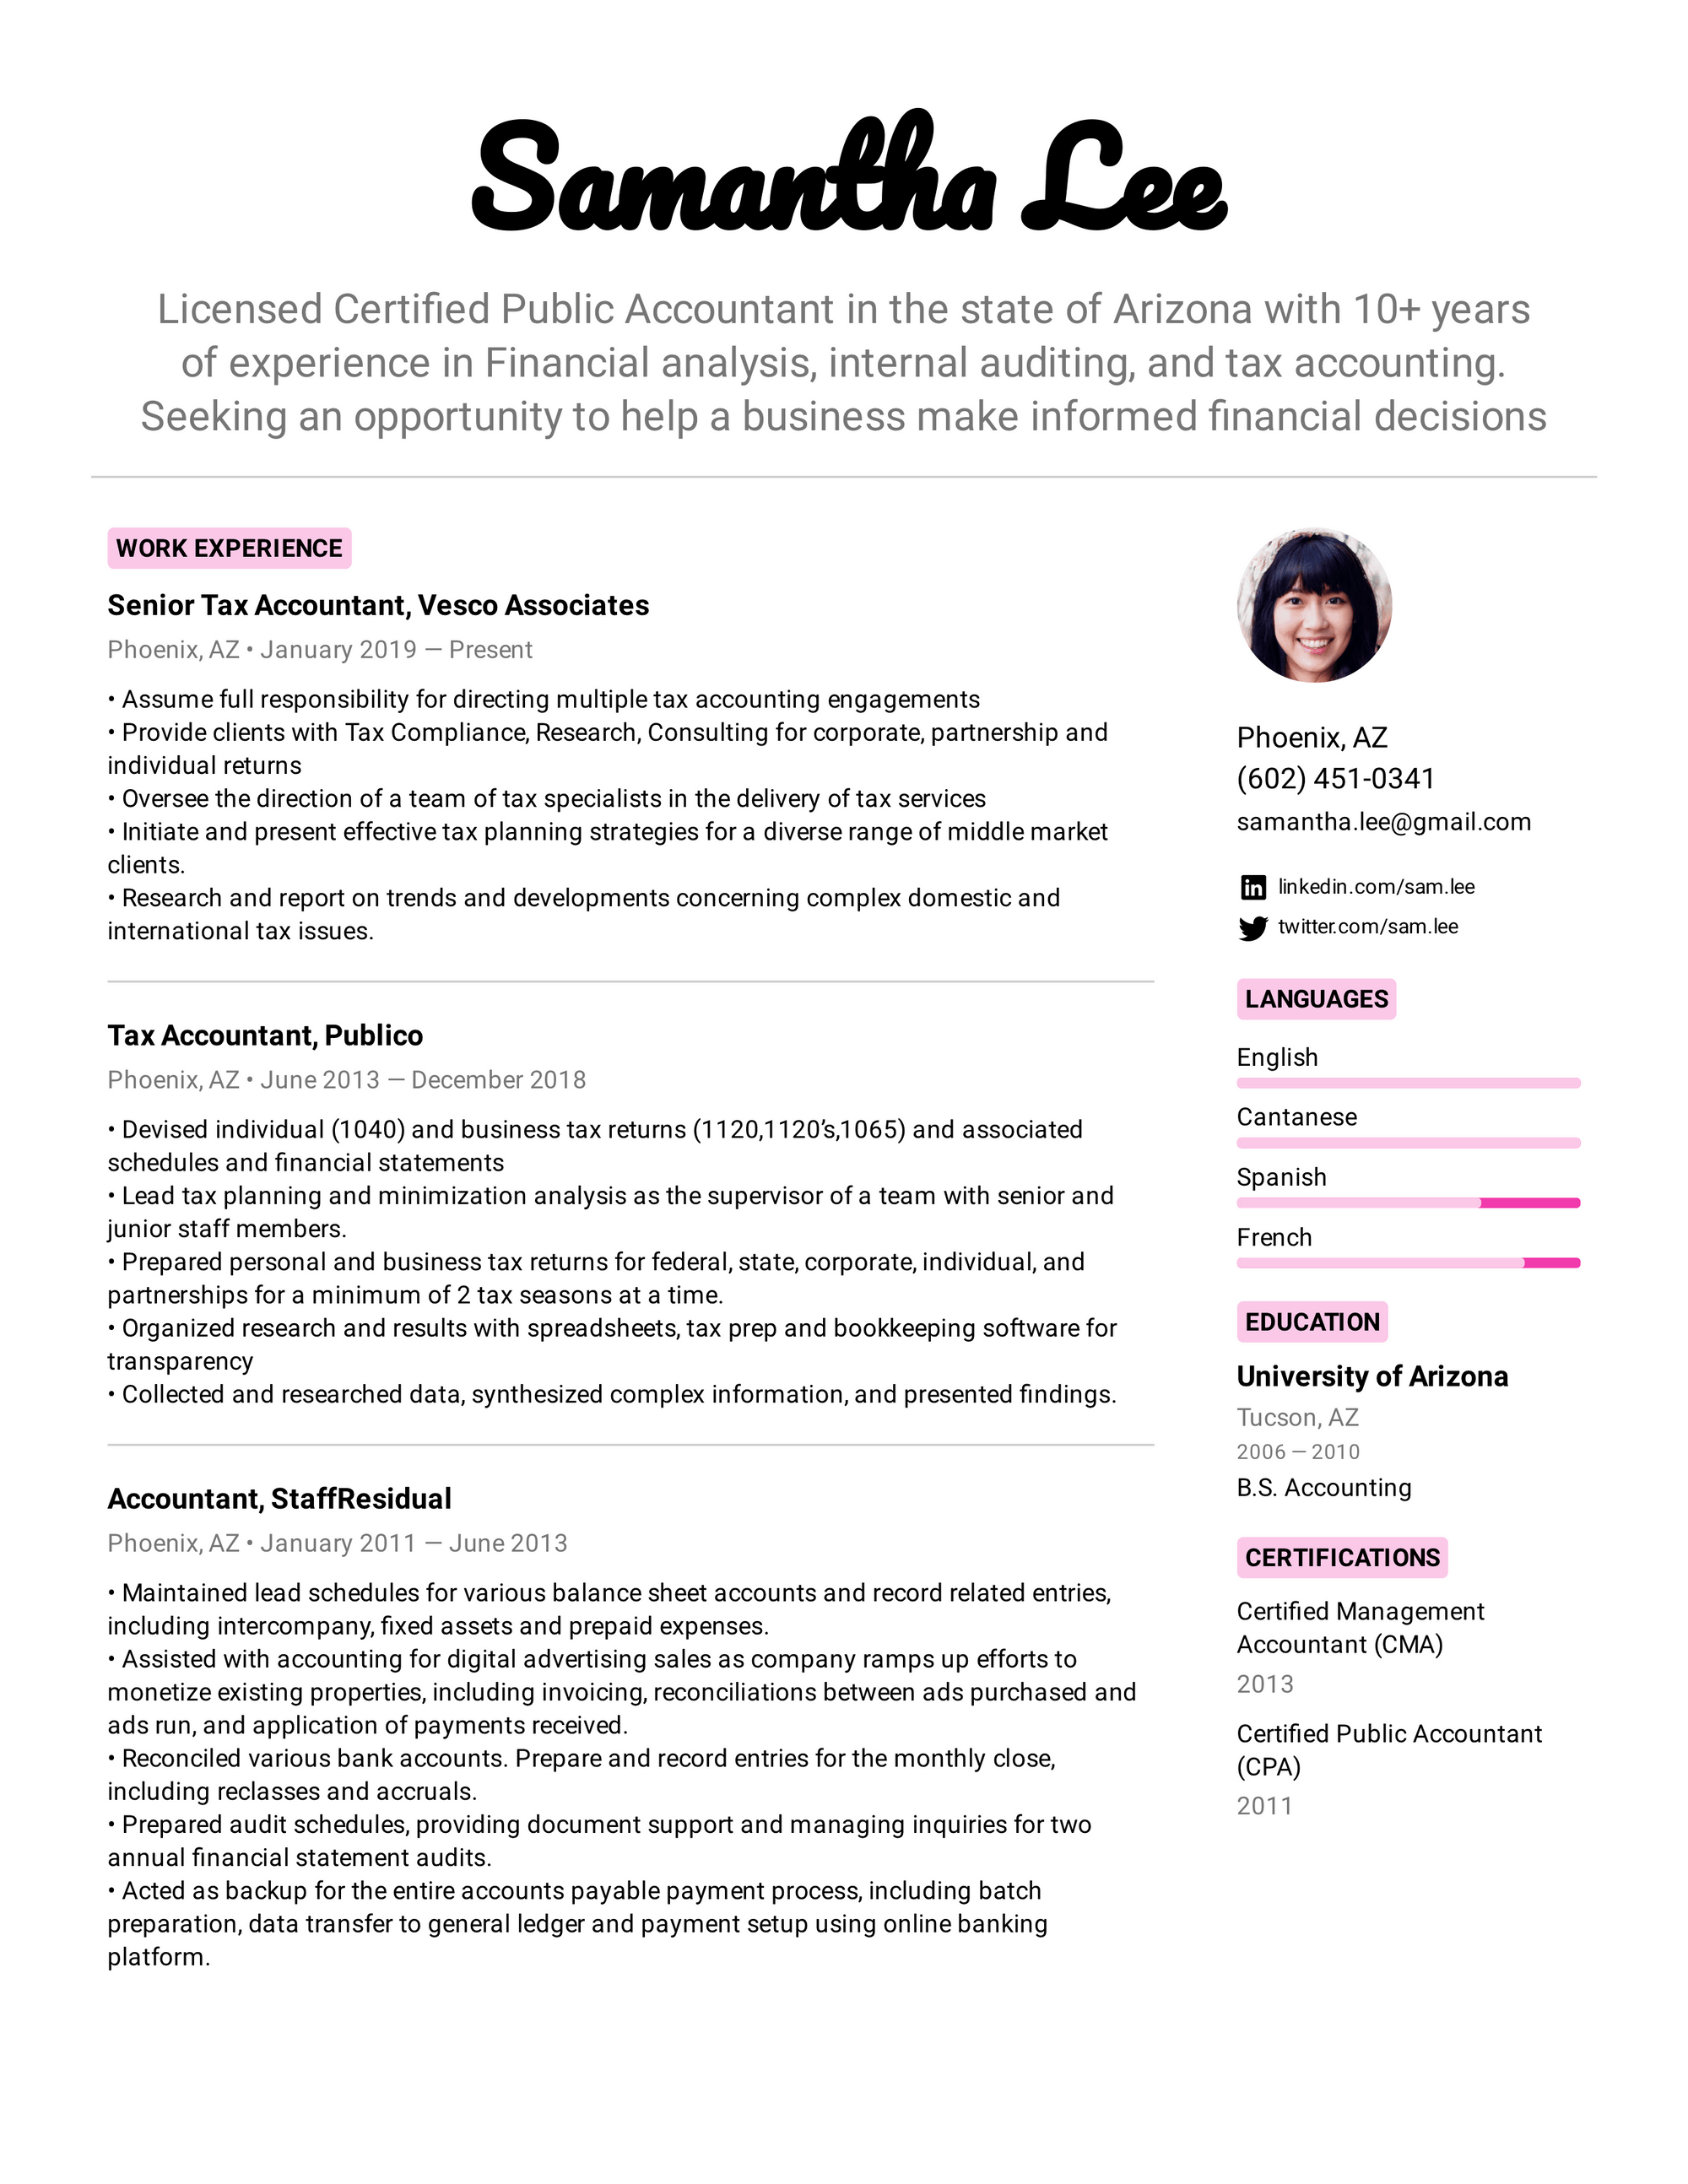 she will have finished her resume